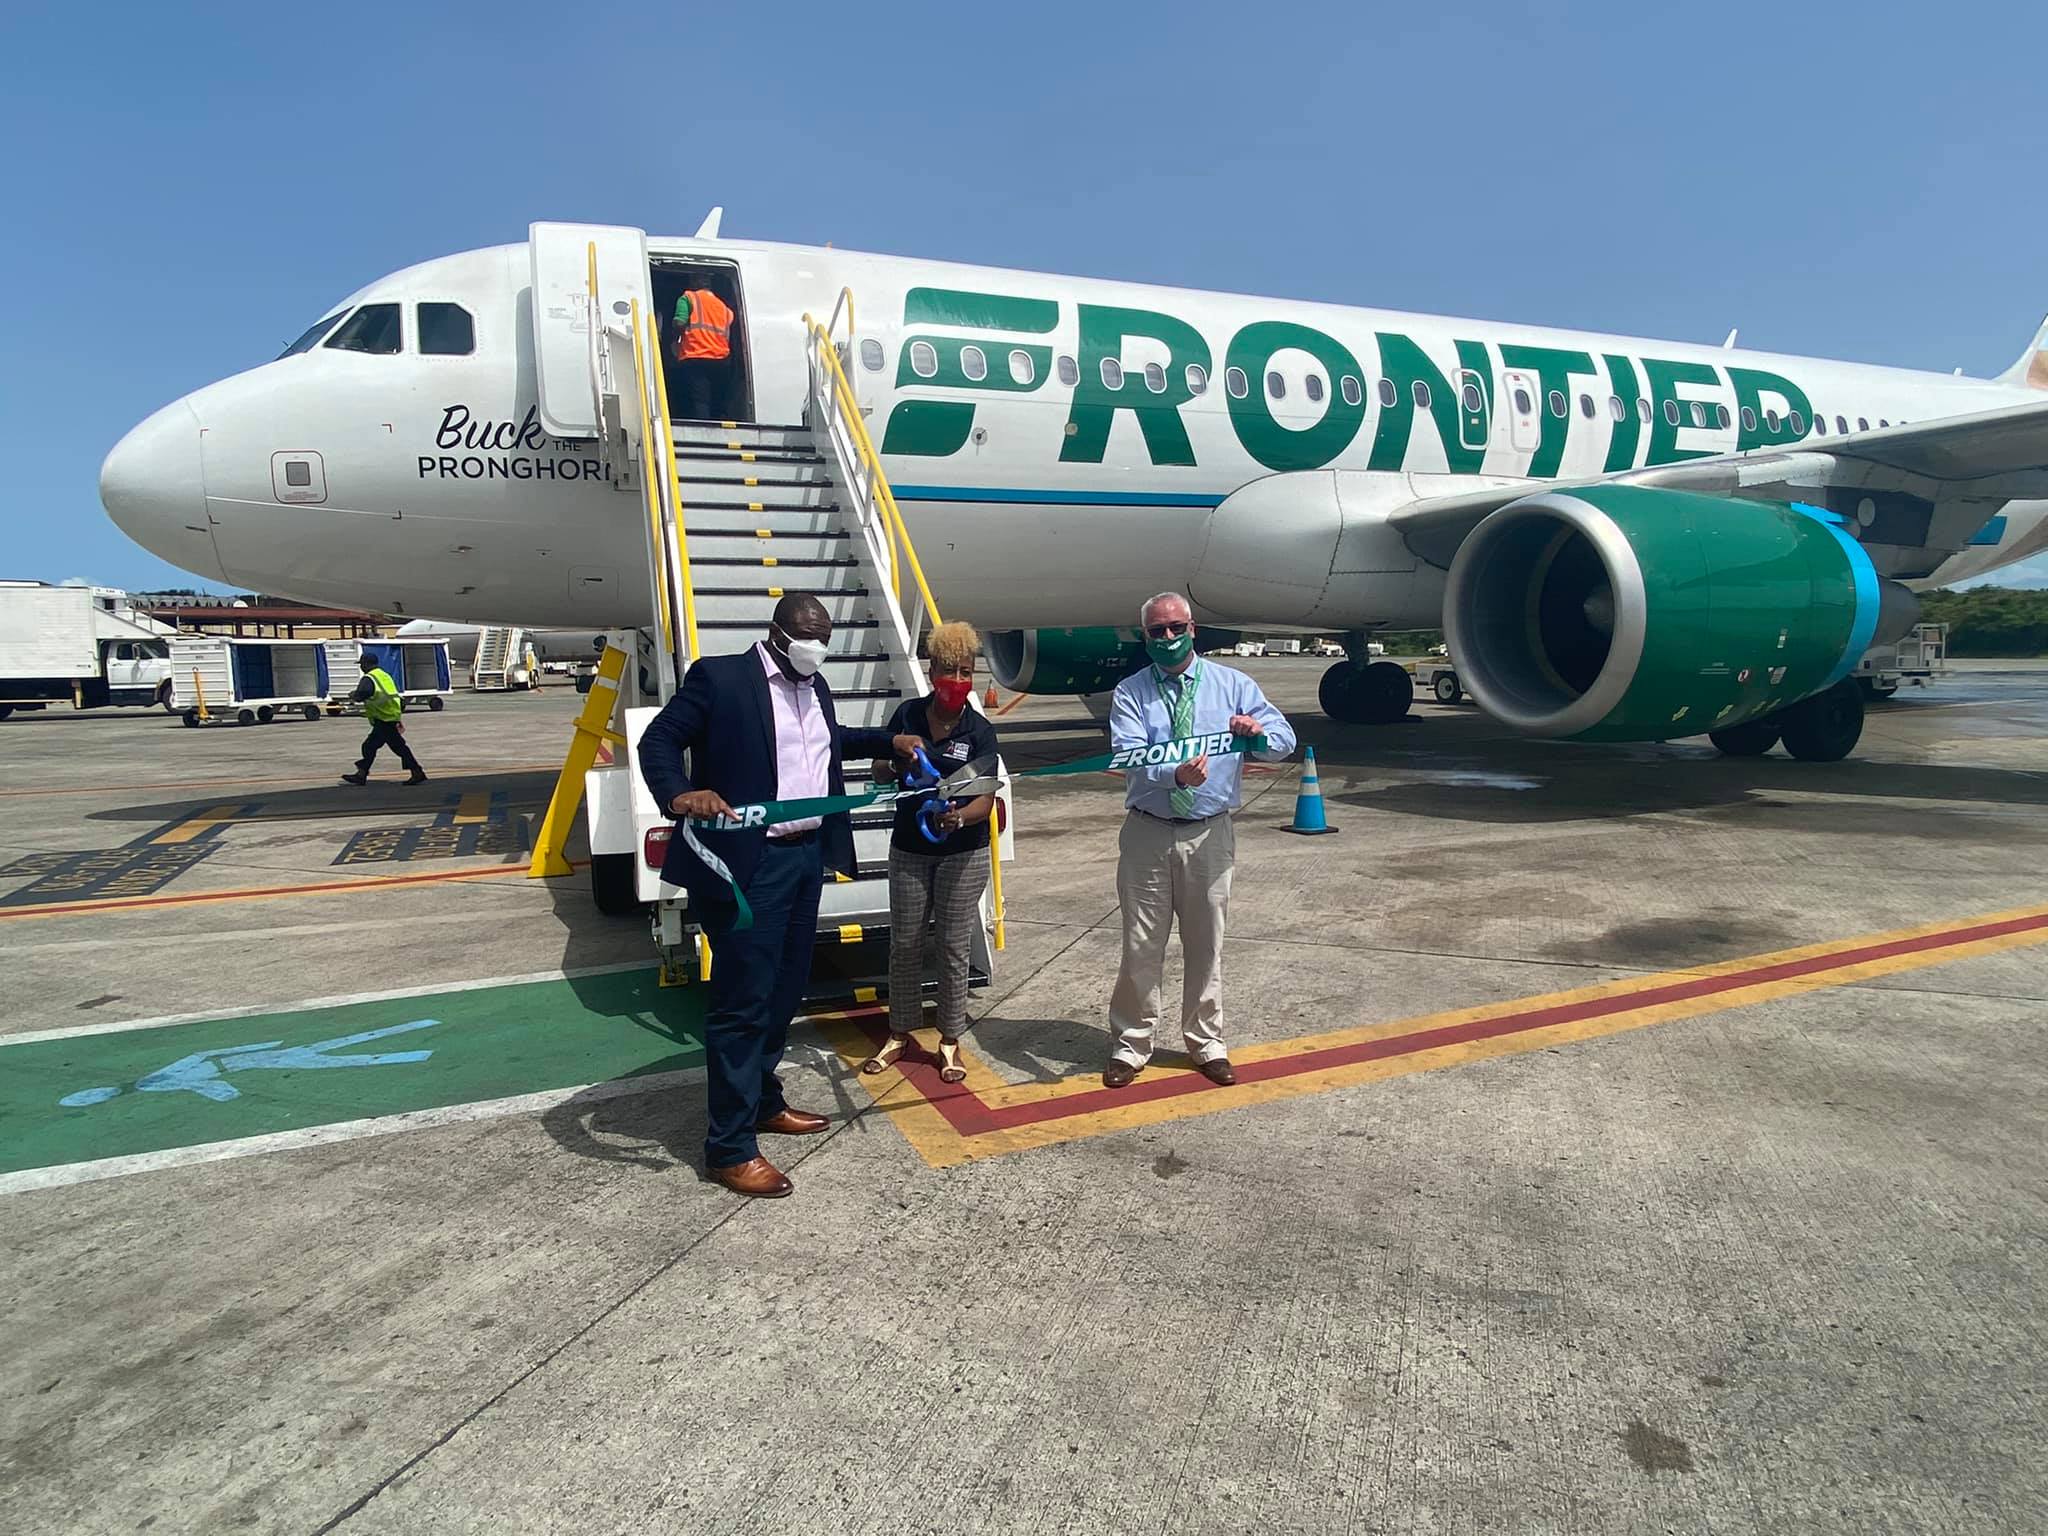 VIPA Welcomes Frontier Airlines As It Lands At St. Thomas Airport Saturday